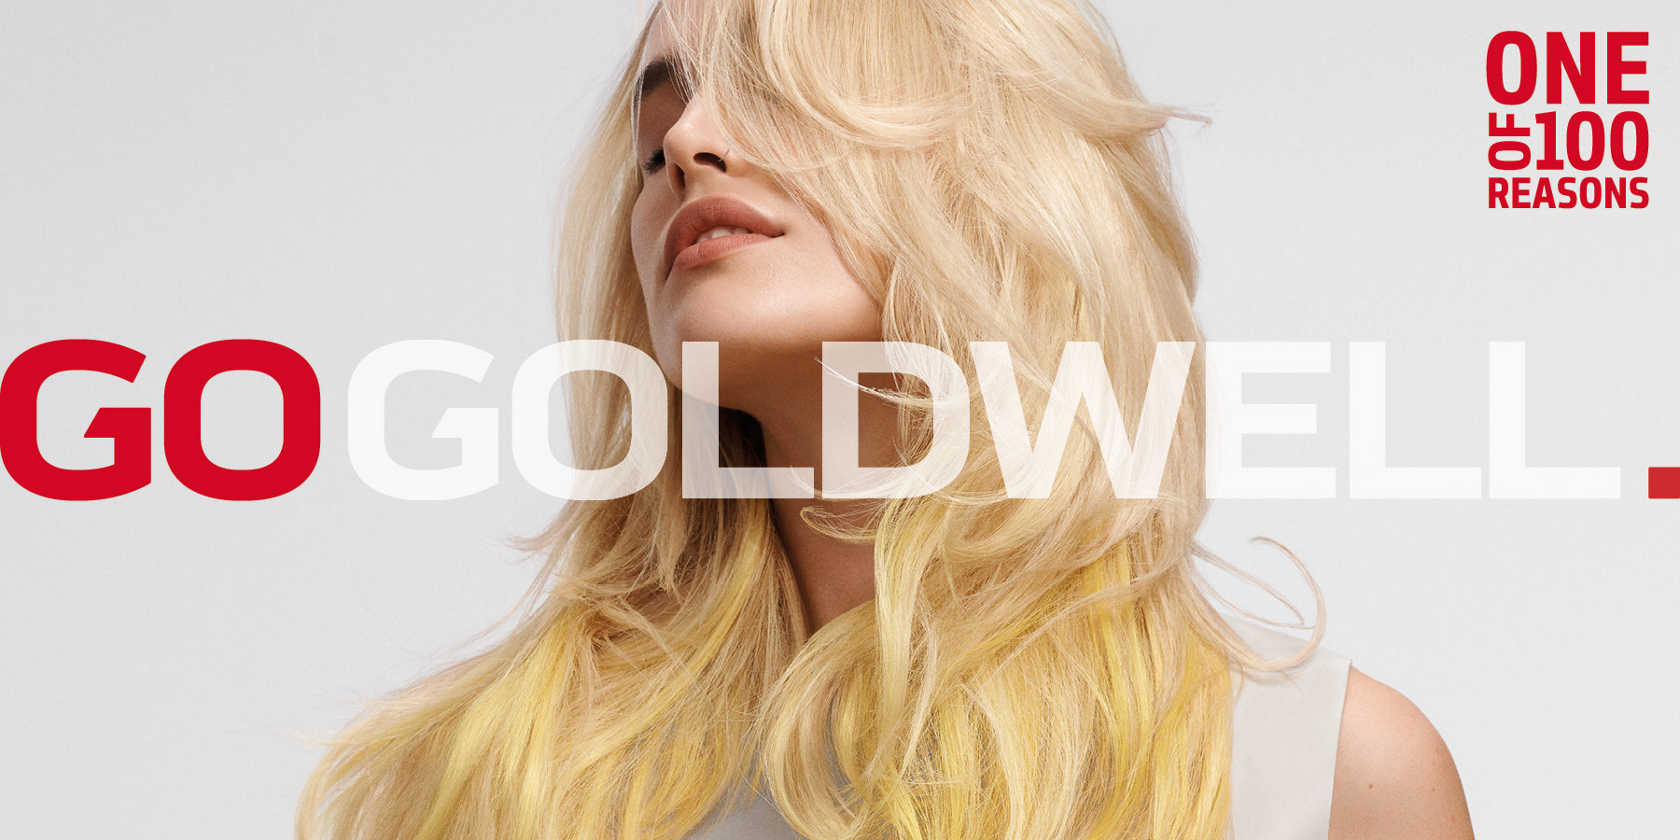 Digital Hair Color Scale - Goldwell USA